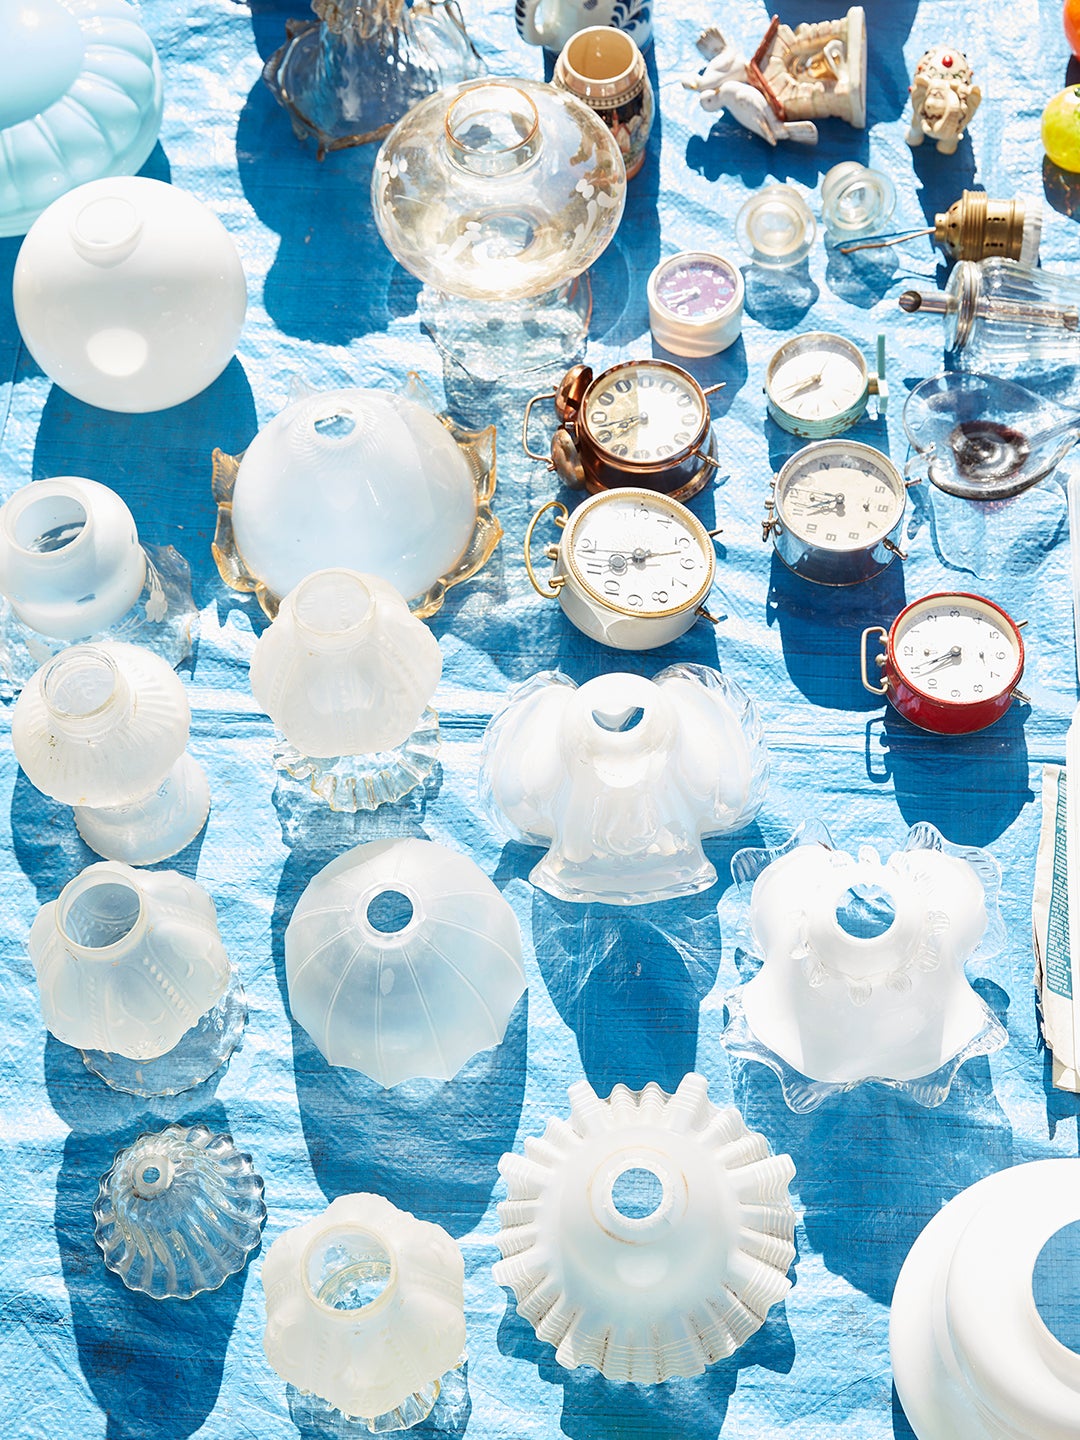 glassware on blue-painted ground